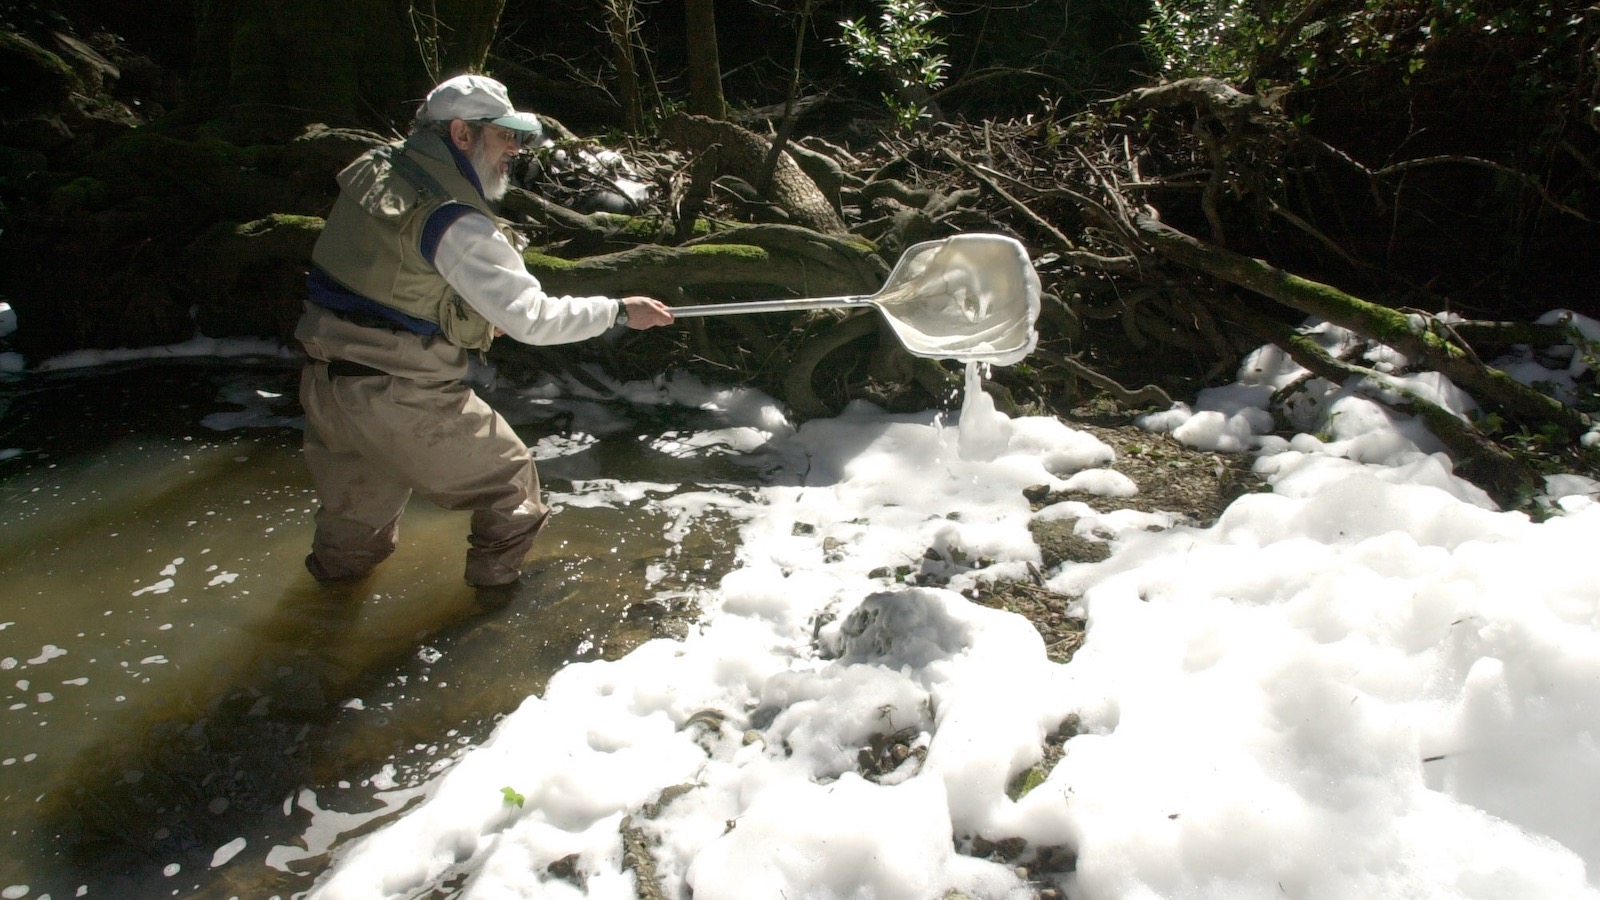 A man wearing waders and a vest uses a net to remove dead salmon from the foamy water of a river polluted with firefighting foam flame retardant.